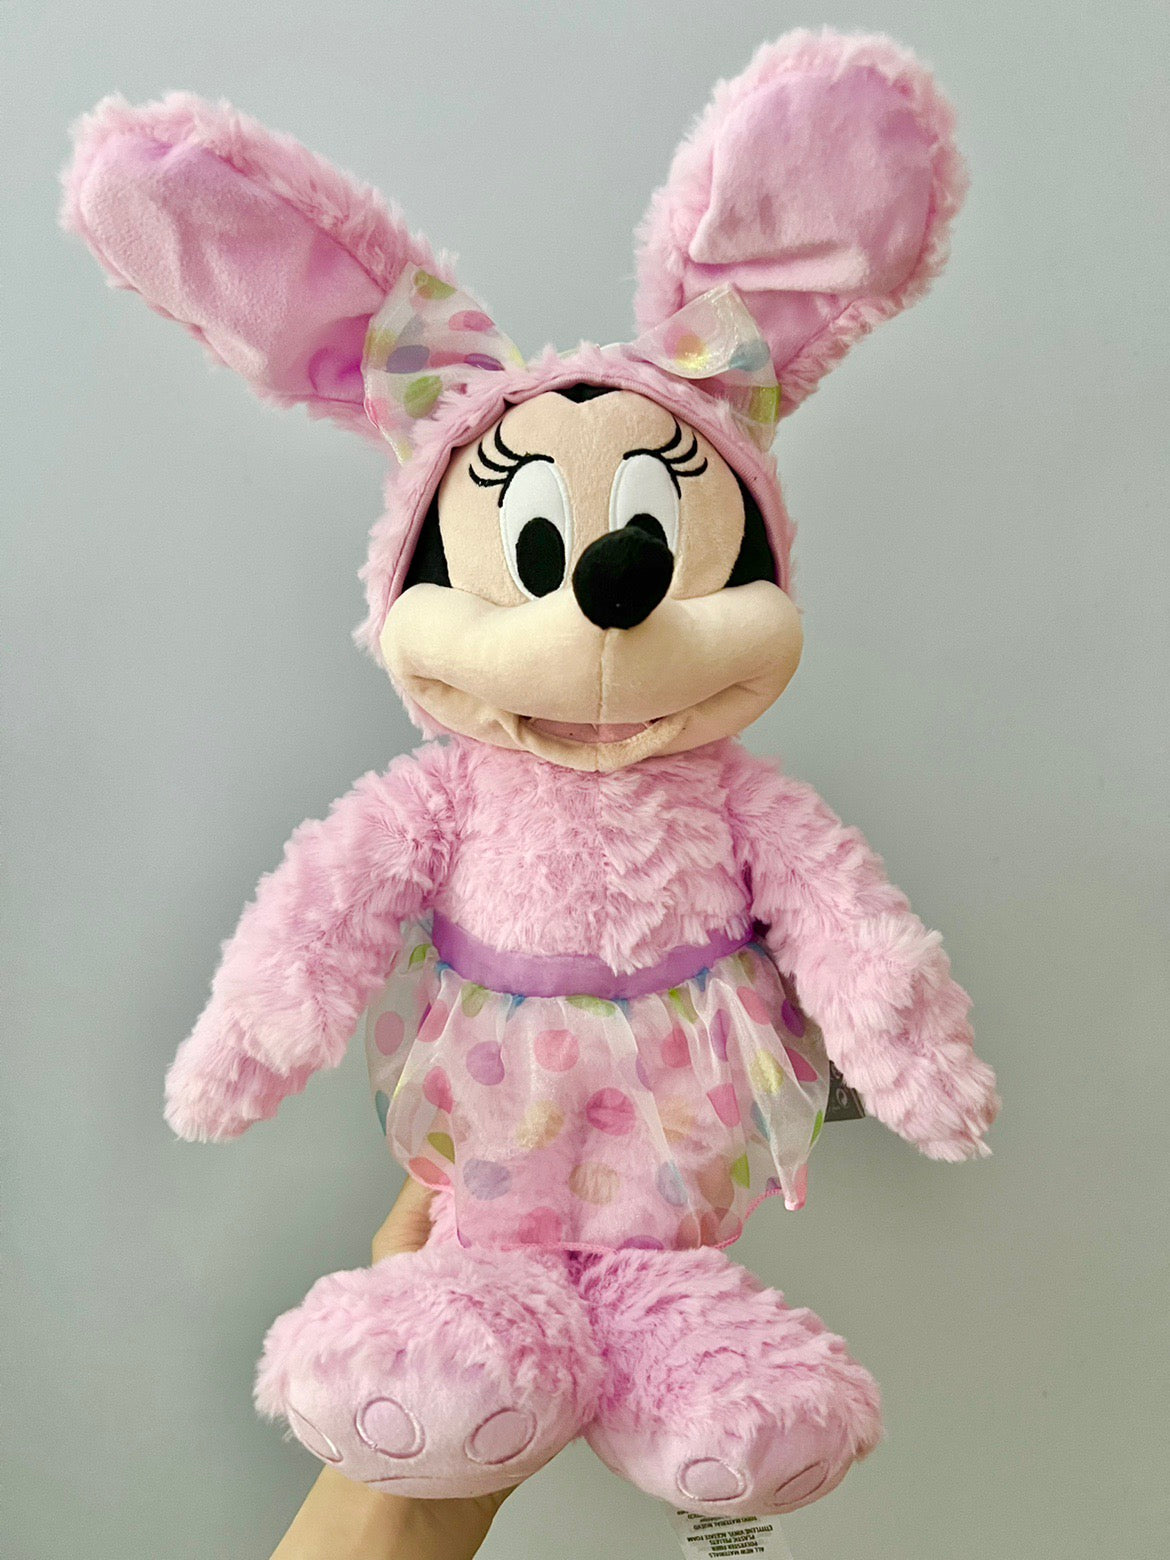 Shanghai Disney Easter holiday Pink rabbit Minnie Mouse plush toy